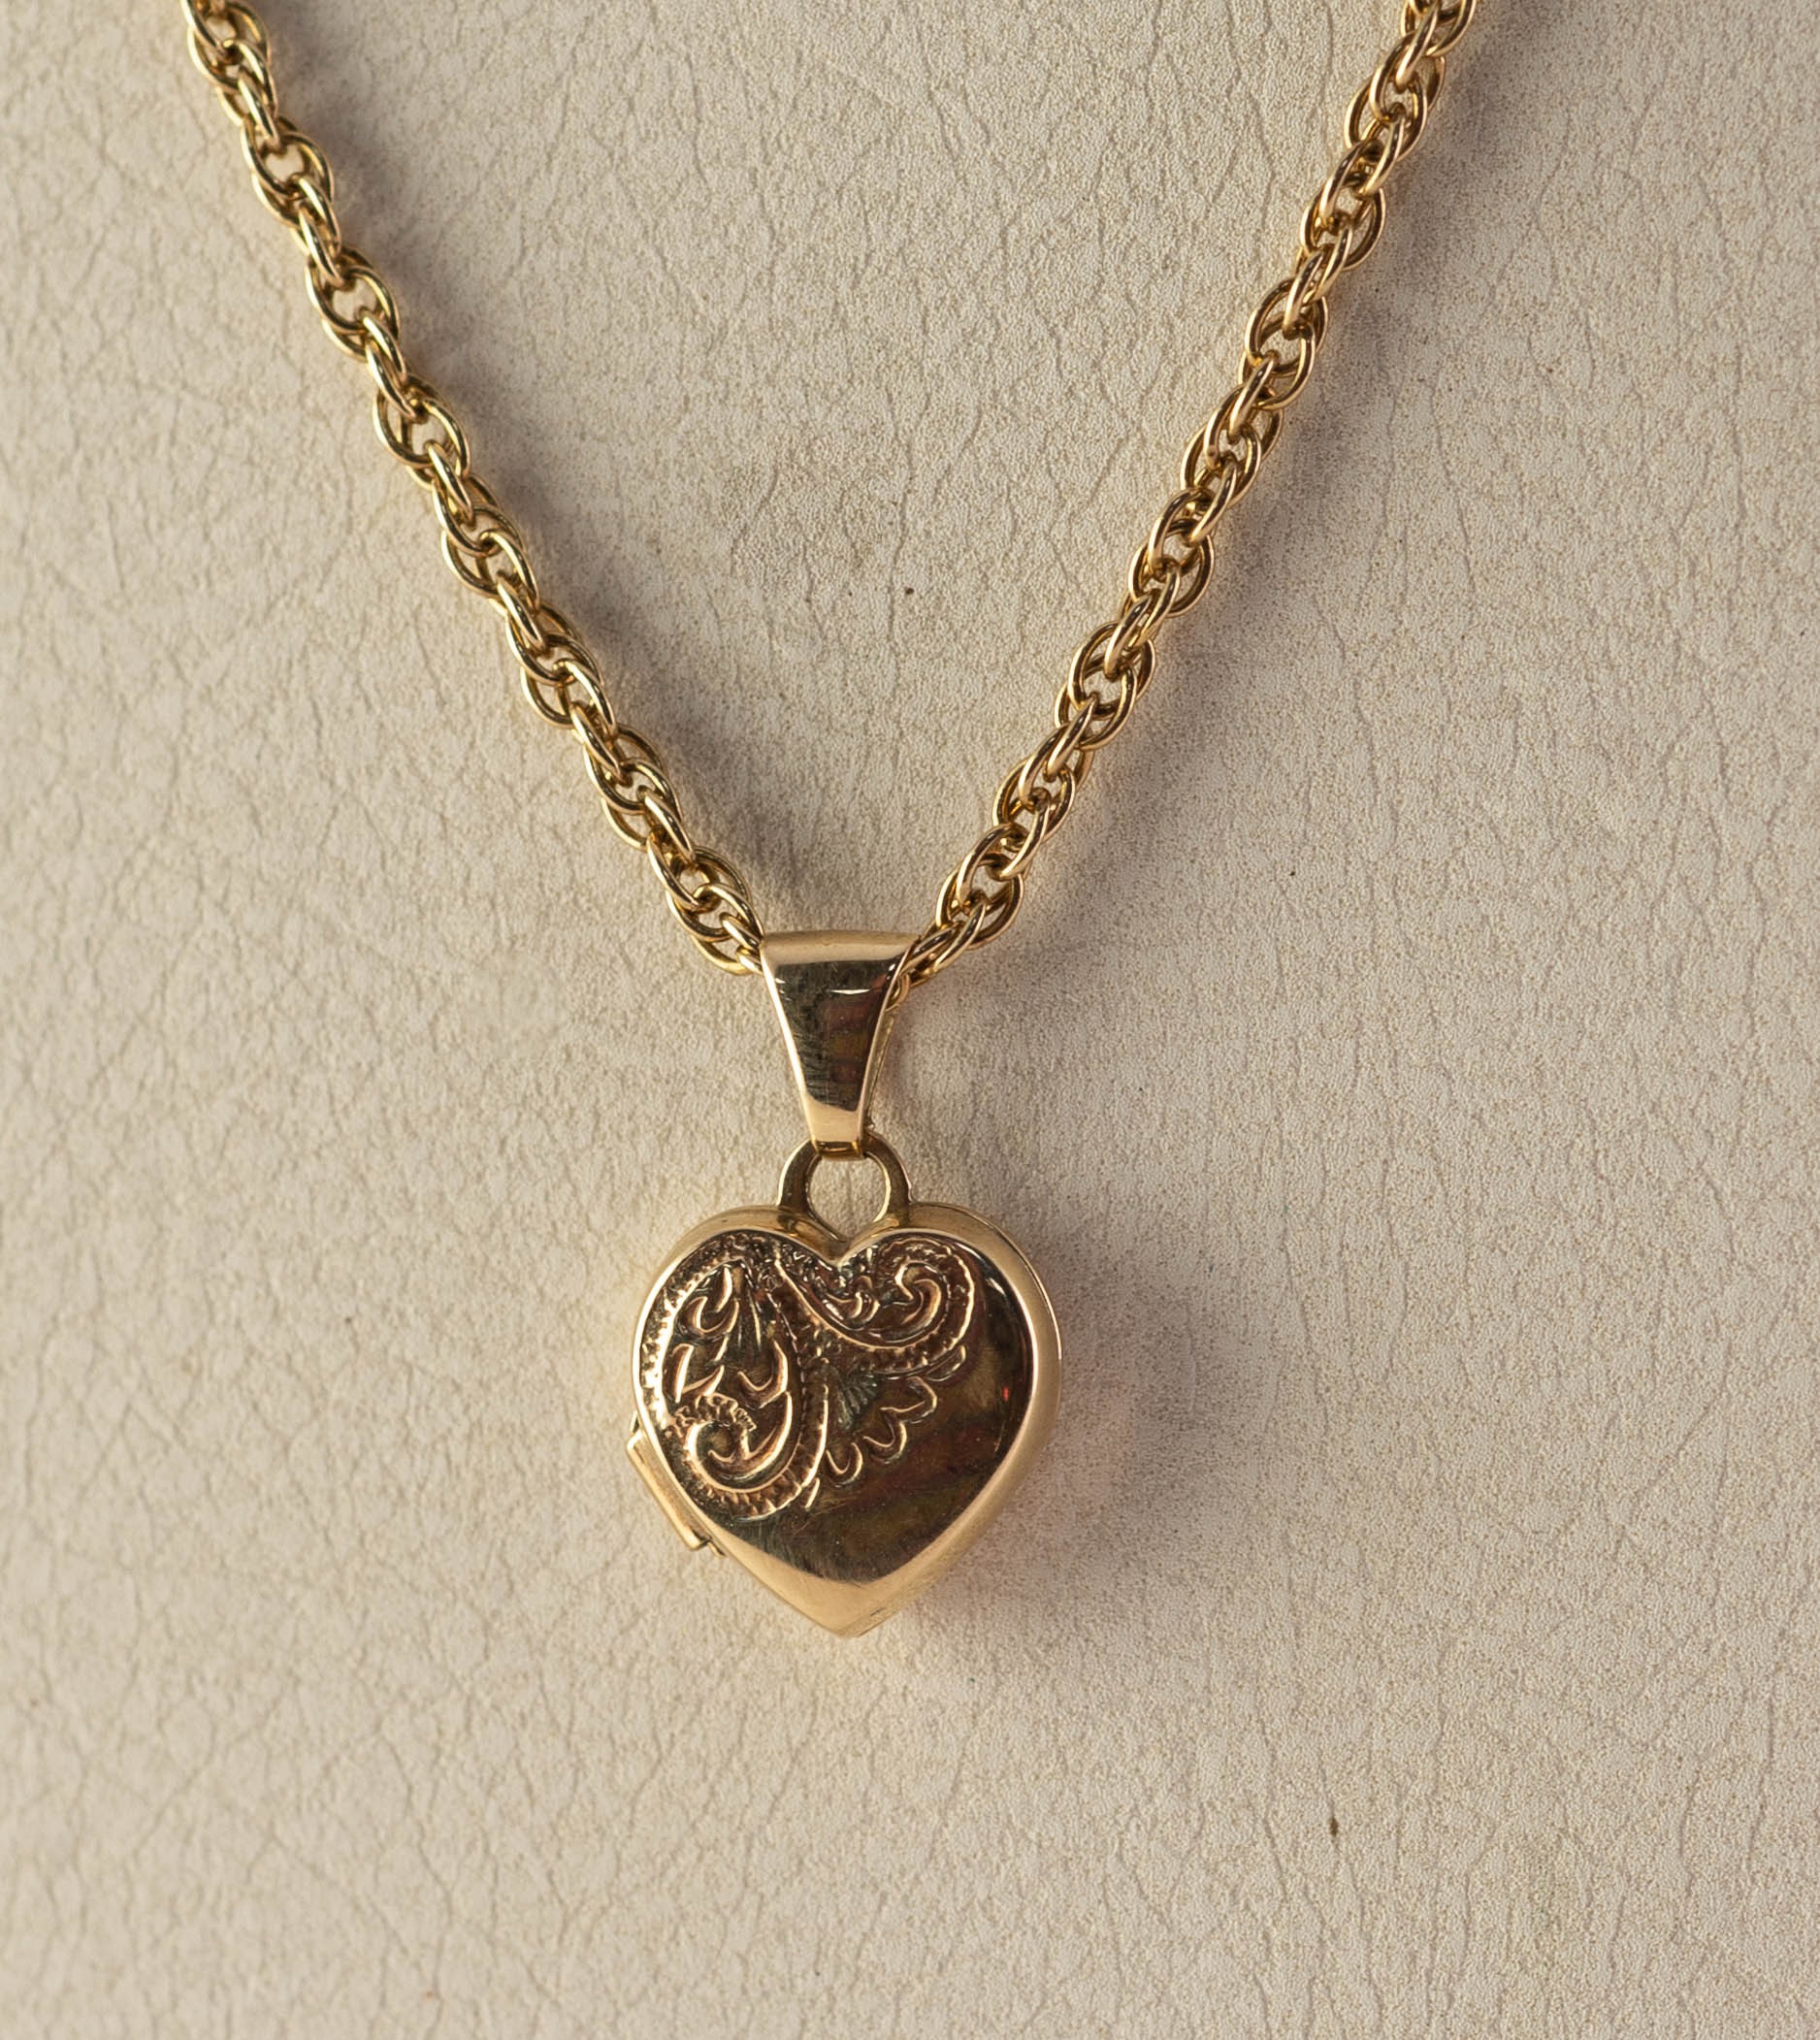 9ct GOLD FINE CHAIN NECKLACE, 17 1/2in (44.4cm) long, with tiny, heart shaped LOCKET PENDANT, - Image 2 of 2